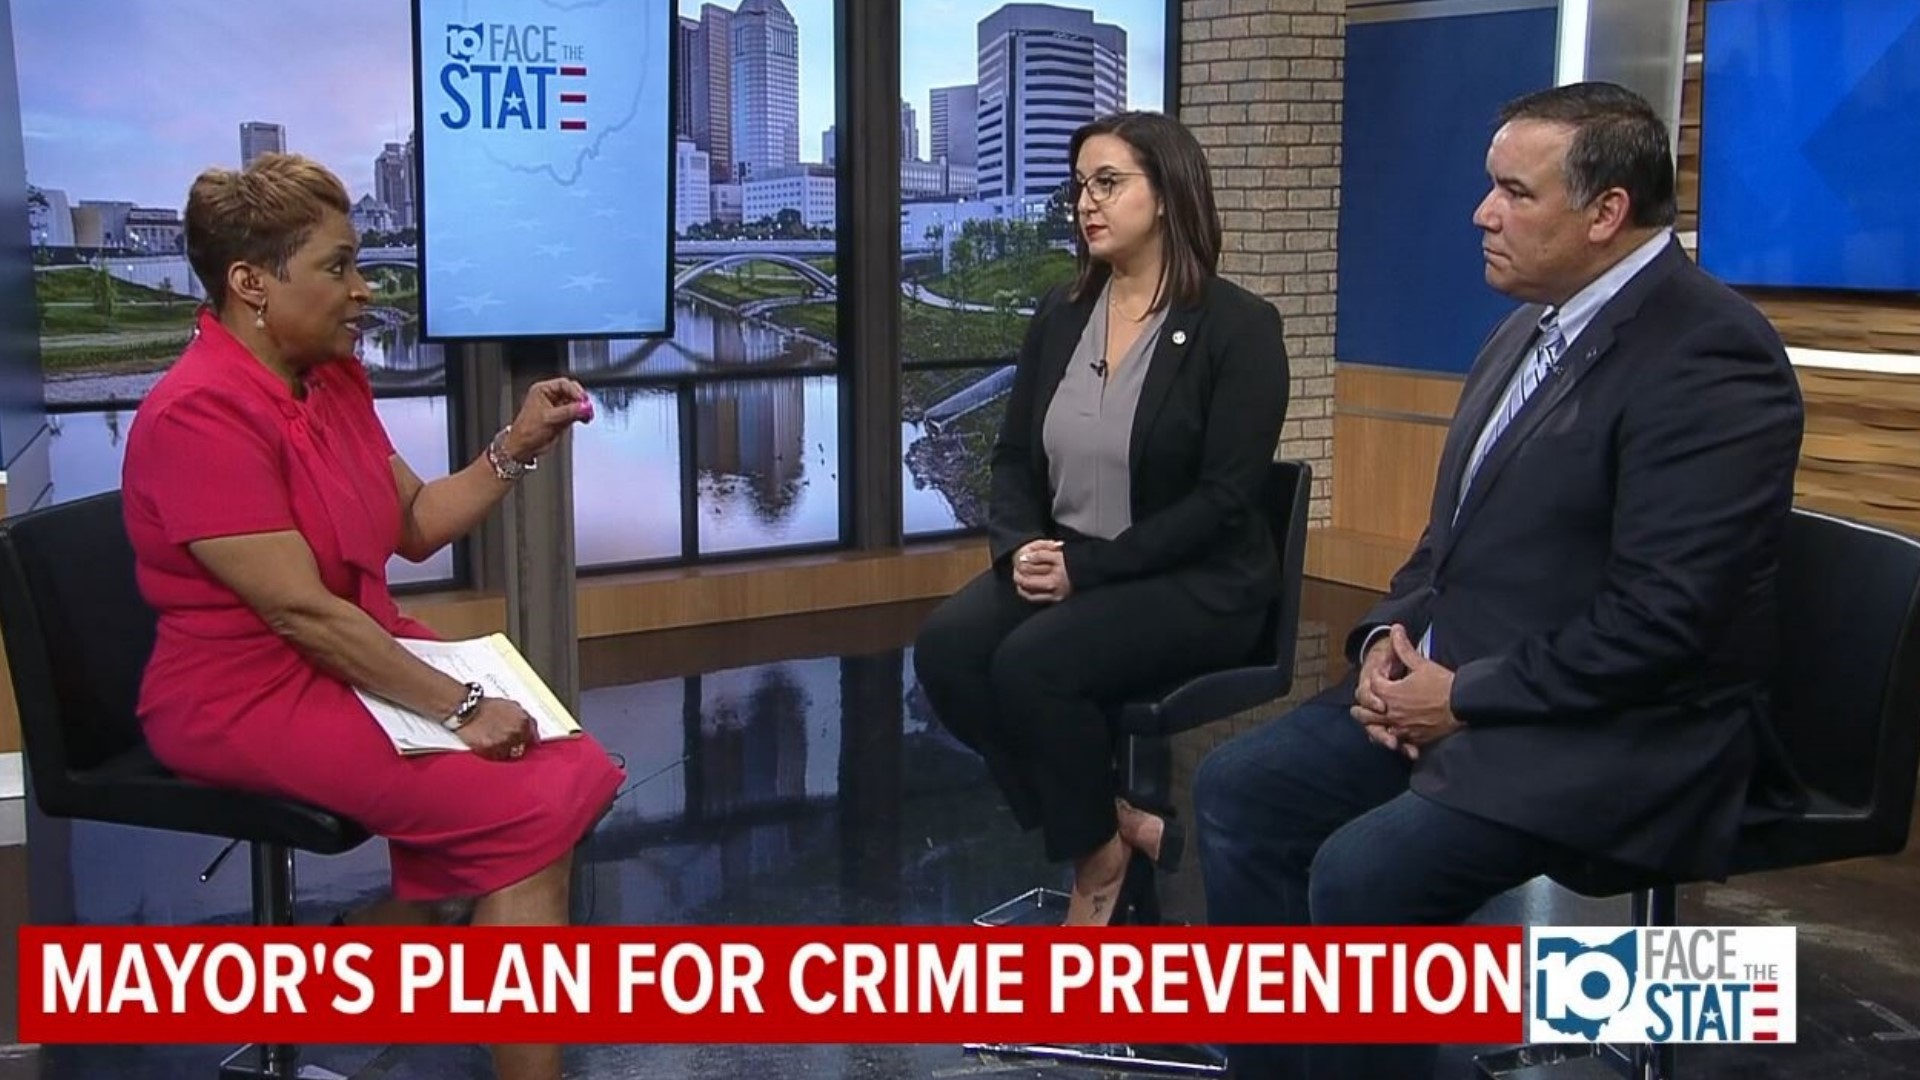 On this week's Face the State, we sit down with Columbus Mayor Andrew Ginther to discuss crime prevention in the city.